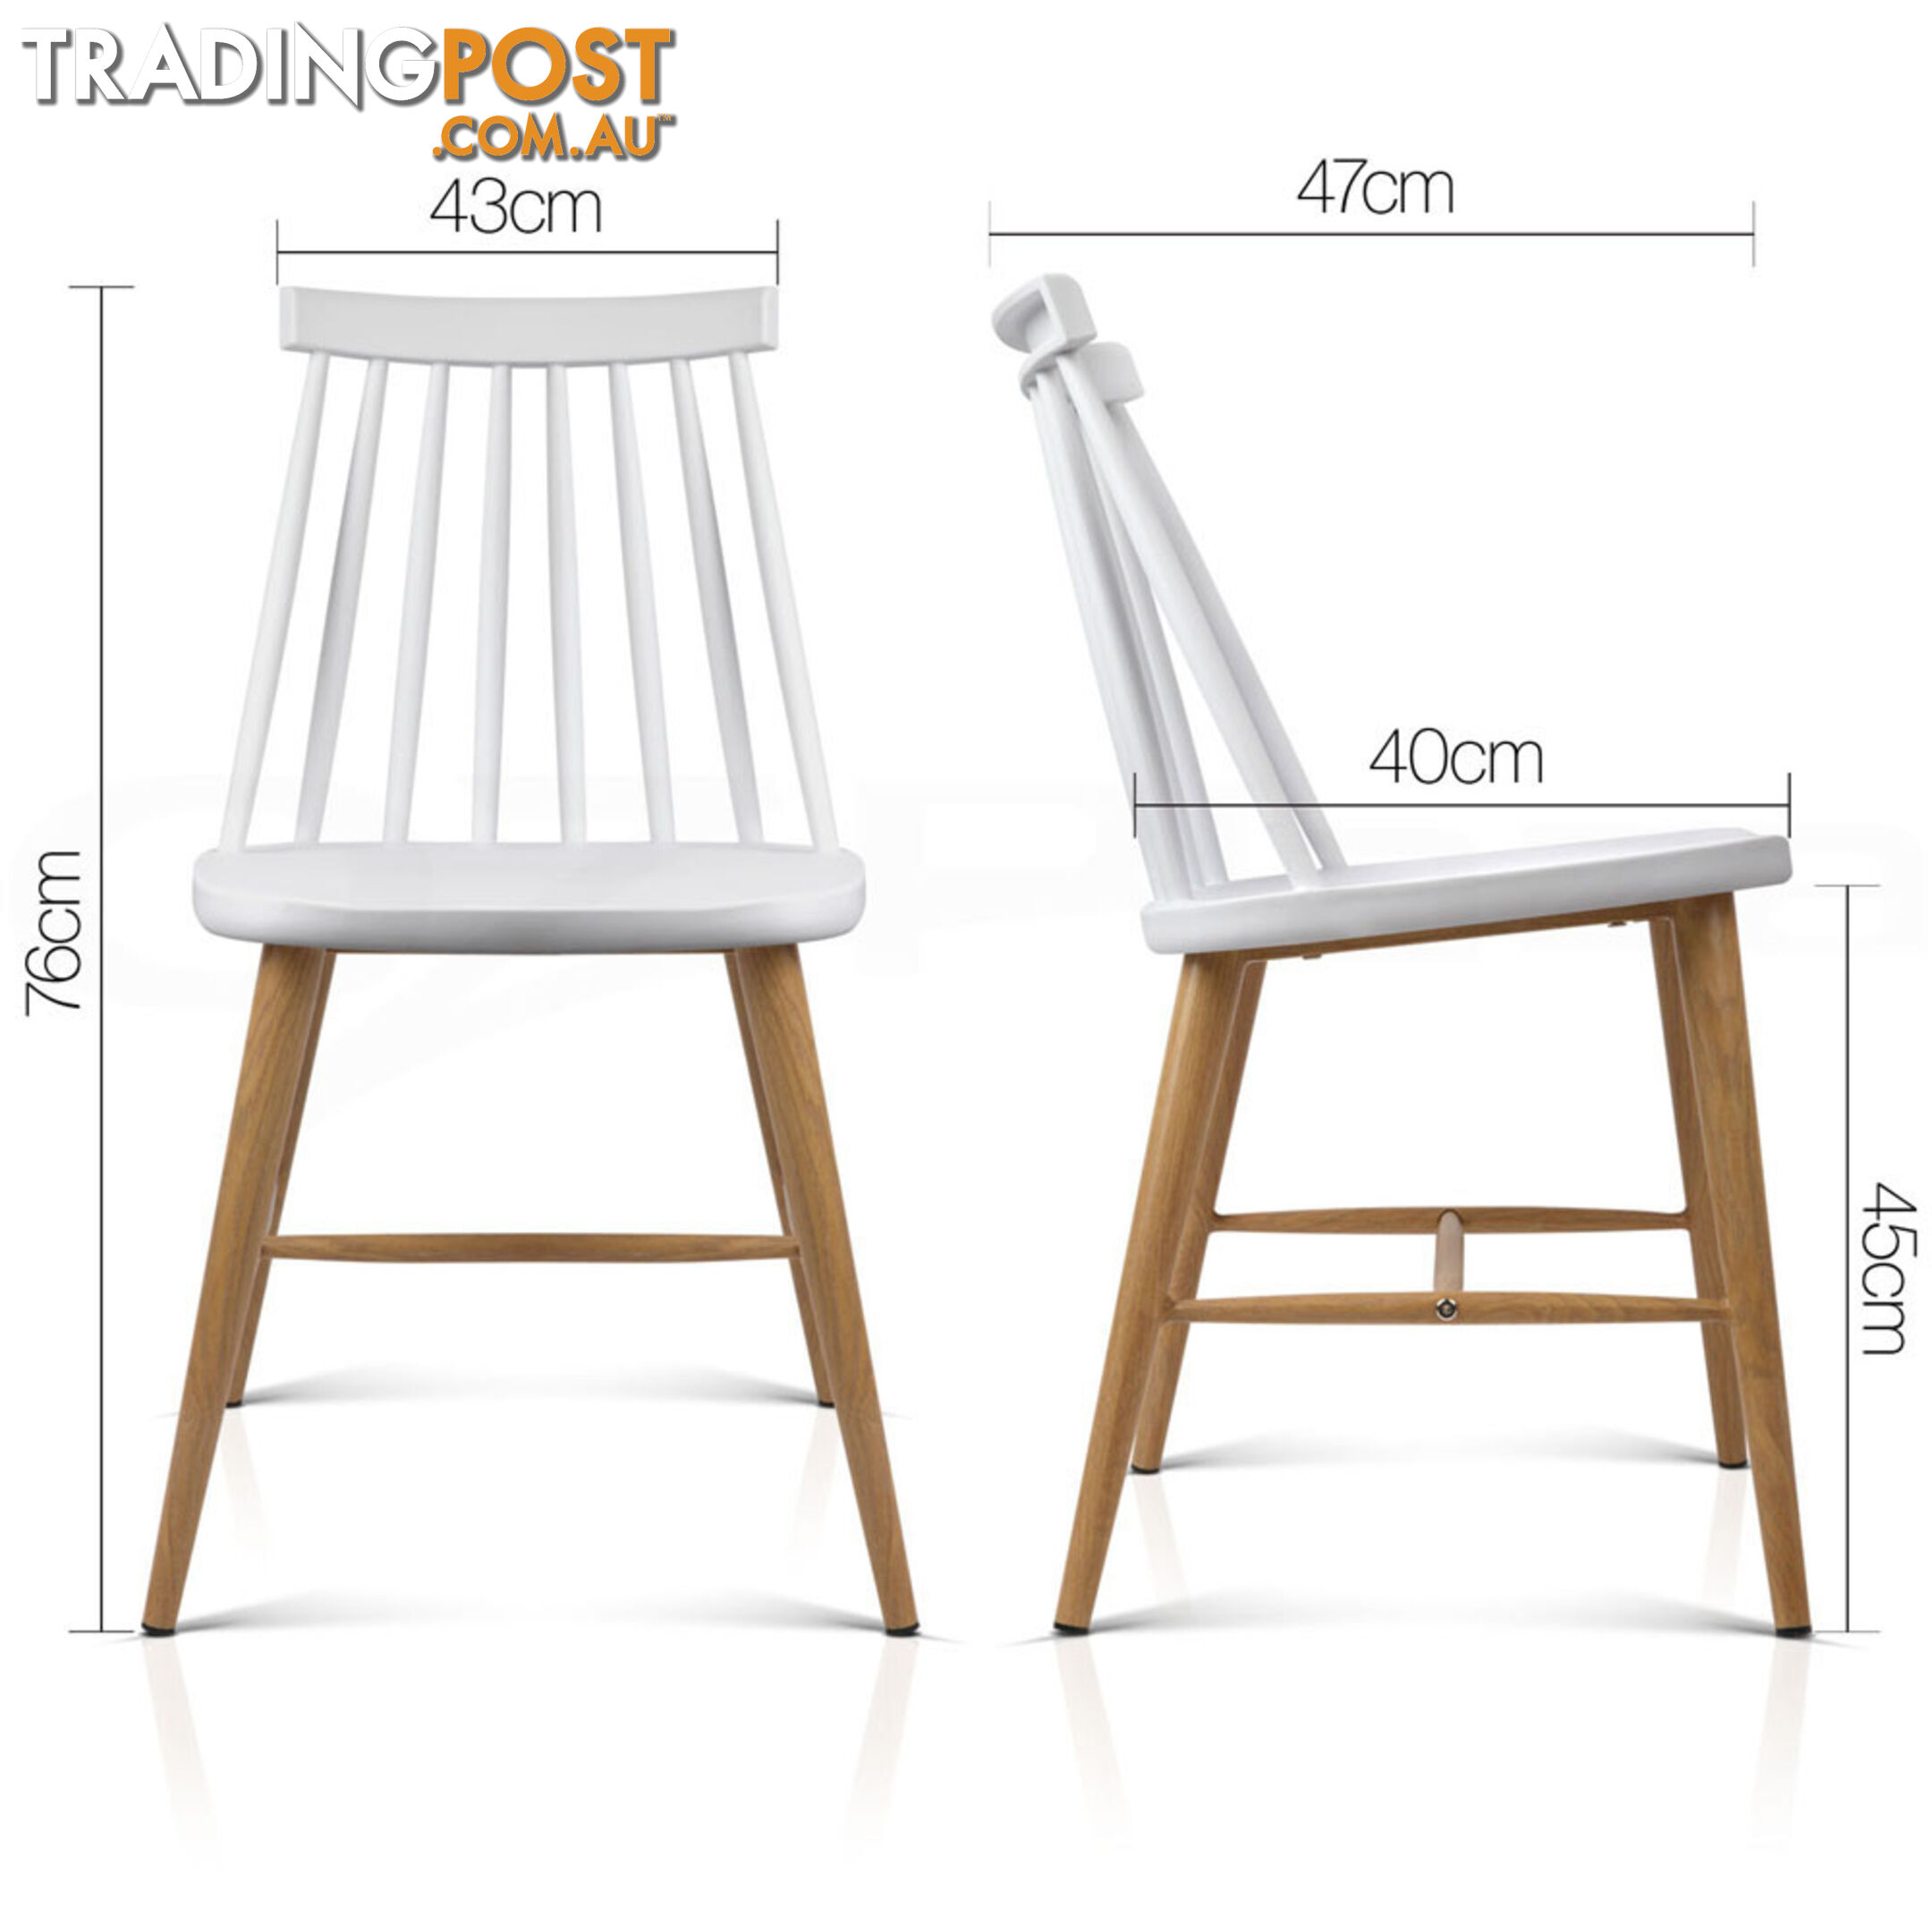 2 x Replica Windsor Dining Chairs Vintage Style Kitchen Bar Cafe Chair White